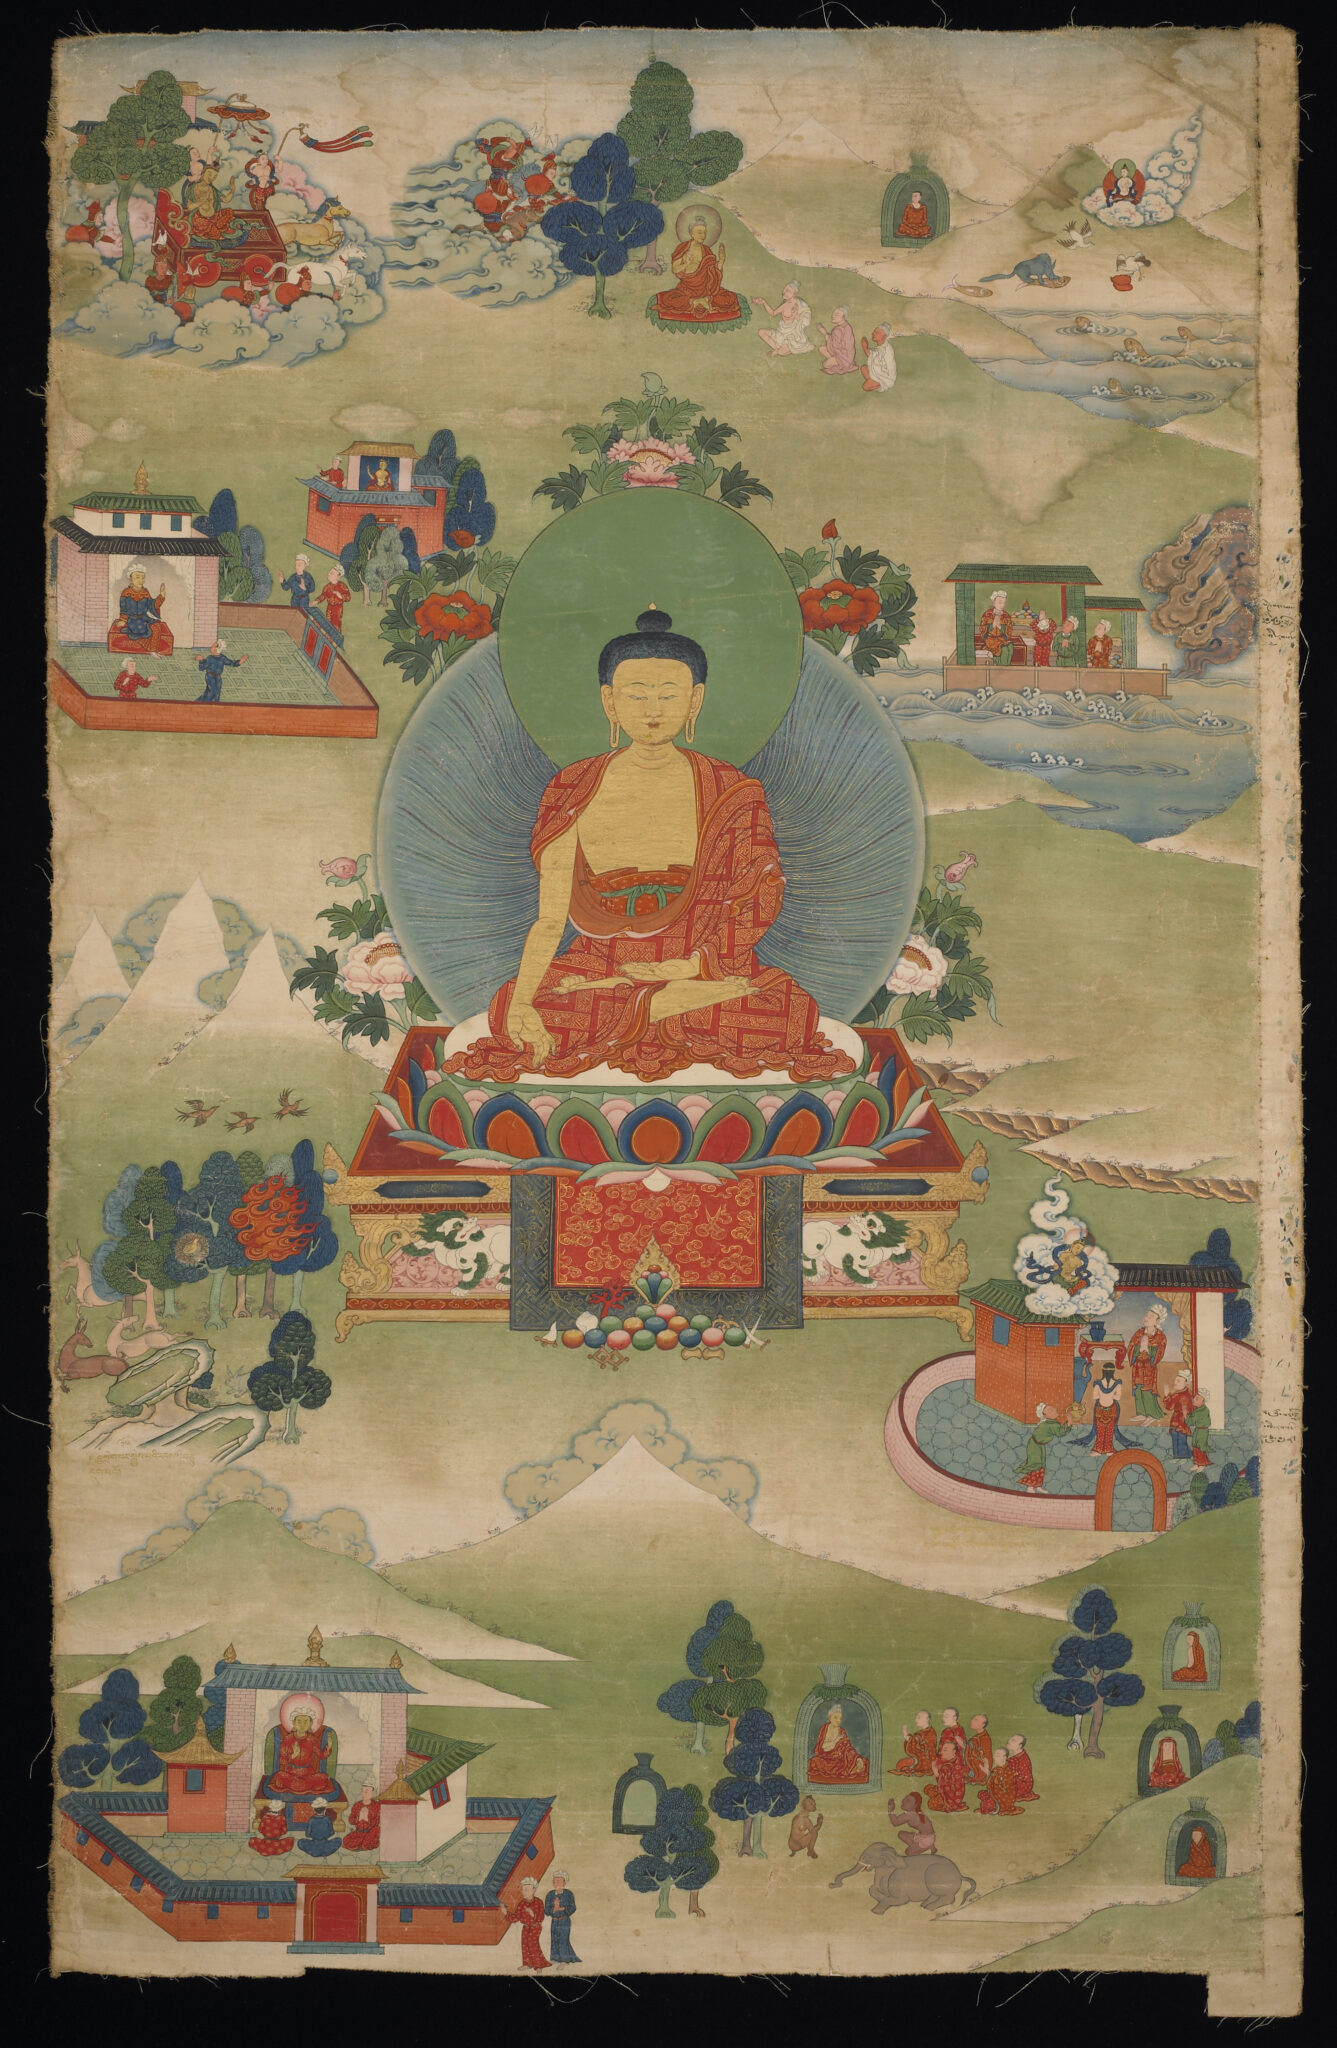 Buddha seated in meditation amidst landscape replete with buildings, vegetation, and figures enacting various scenes